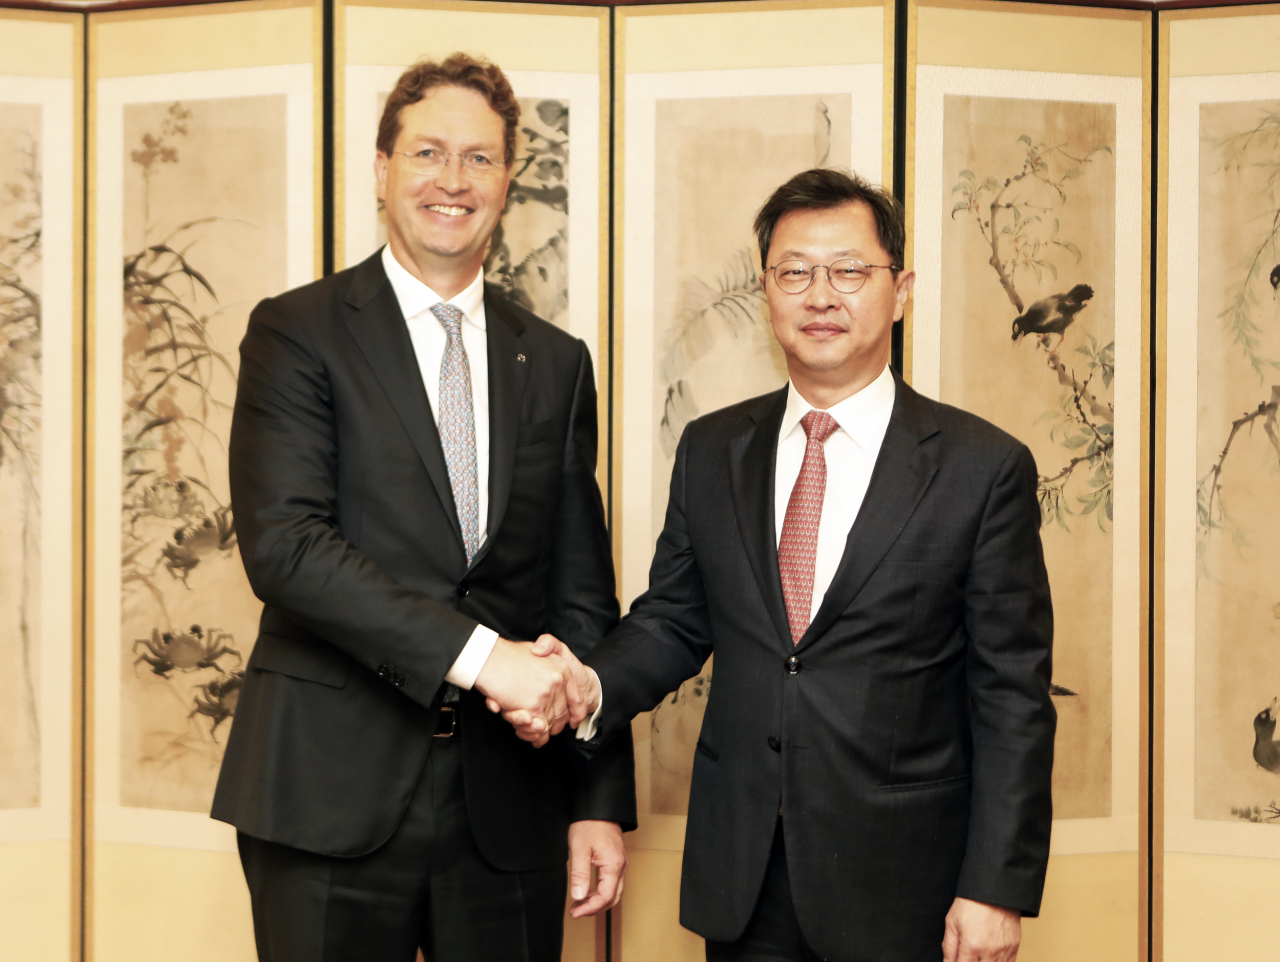 SK Group Executive Vice Chairman Chey Jae-won (right) and Ola Kallenius, CEO of Mercedes-Benz Group pose for a photo during their meeting in Seoul on Wednesday. (SK Group)